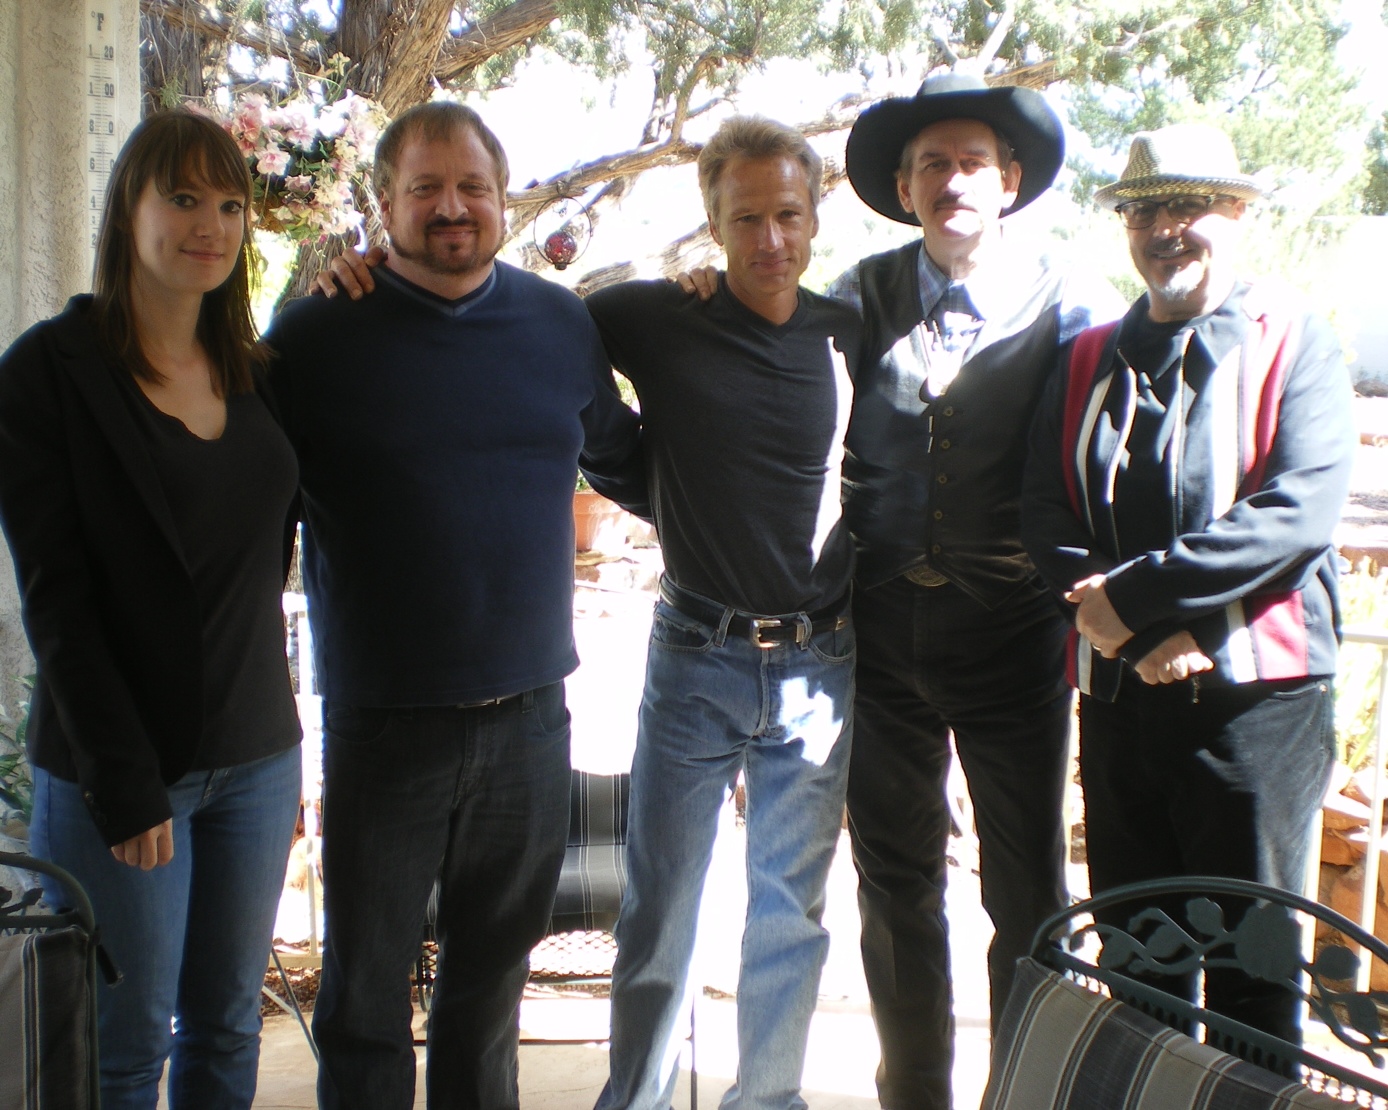 Uncovering Aliens, a RawTV production Discovery Network 2014 with cast; L to R Maureen Elsberry, Mike Bara, George Pilgrim, Derrel Sims and Steven Jones